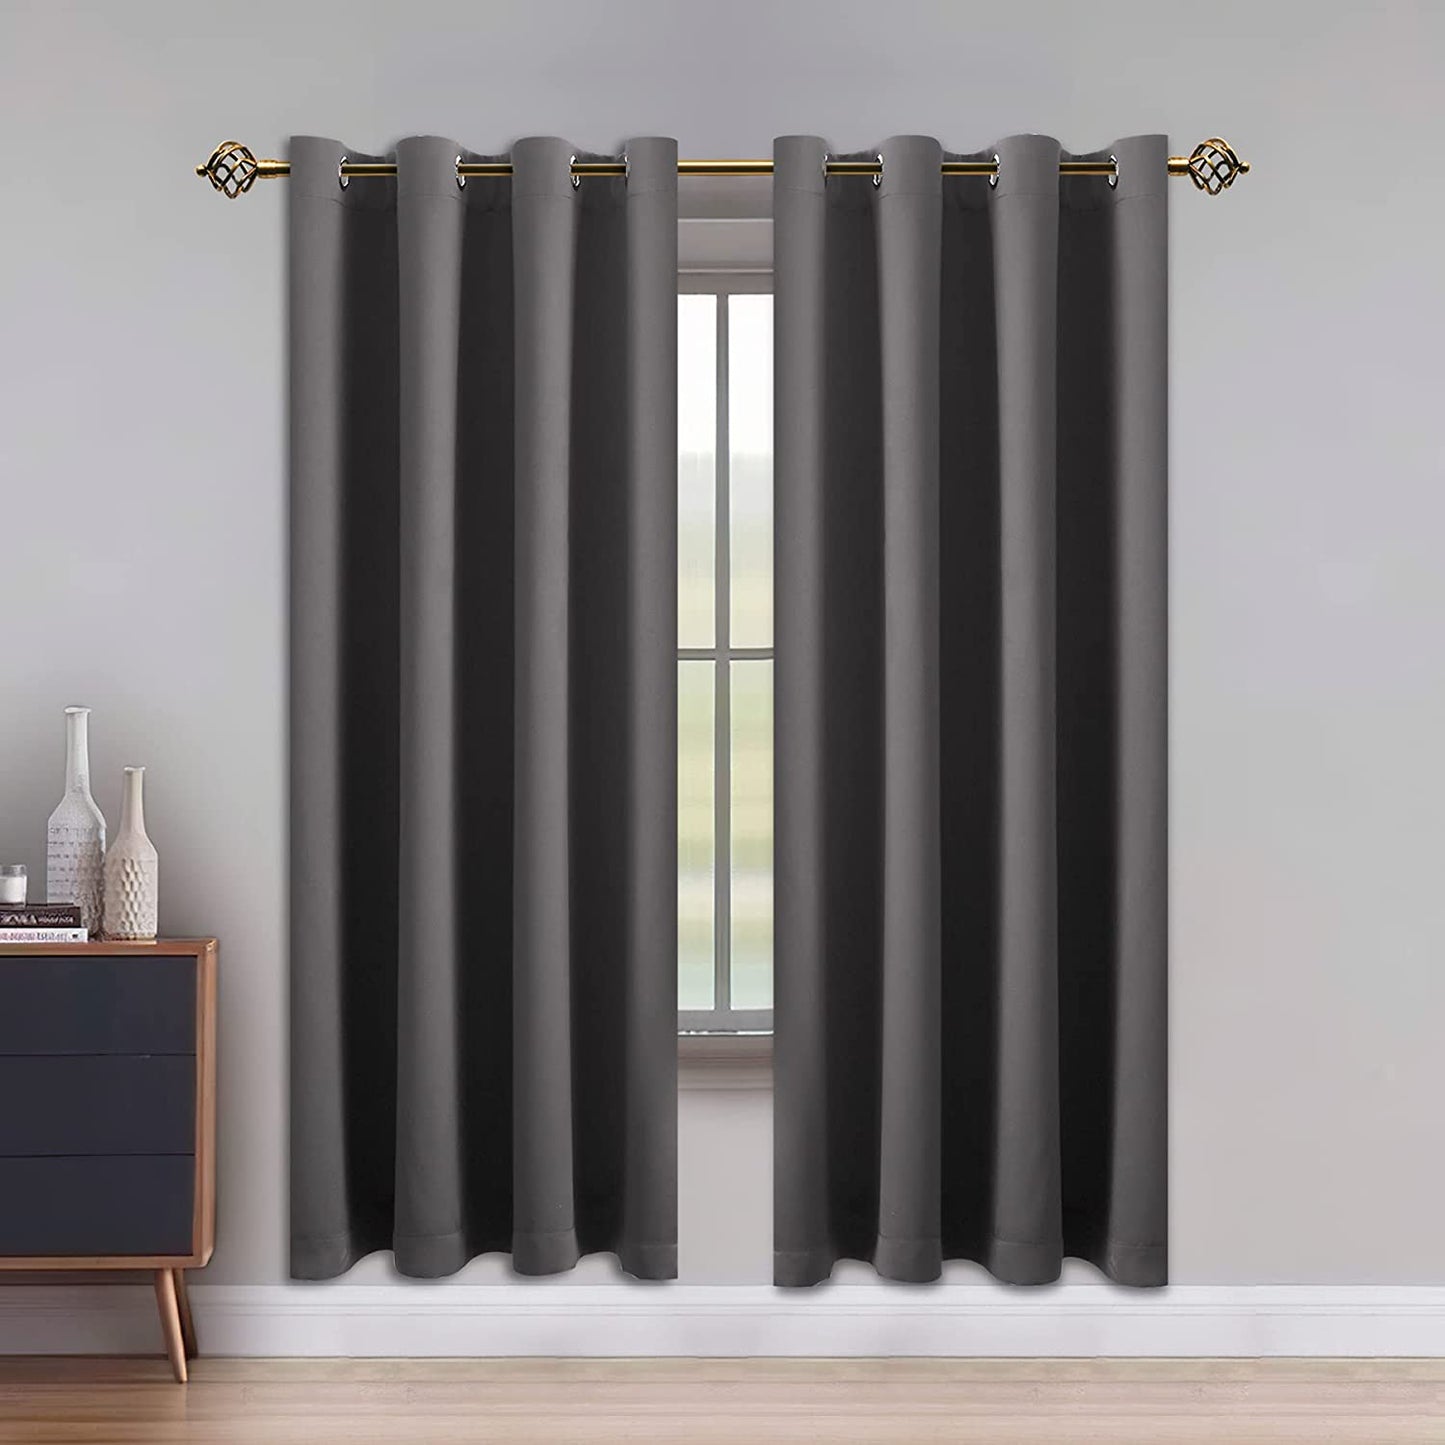 LUSHLEAF Blackout Curtains for Bedroom, Solid Thermal Insulated with Grommet Noise Reduction Window Drapes, Room Darkening Curtains for Living Room, 2 Panels, 52 X 63 Inch Grey  SHEEROOM Grey 52 X 84 Inch 